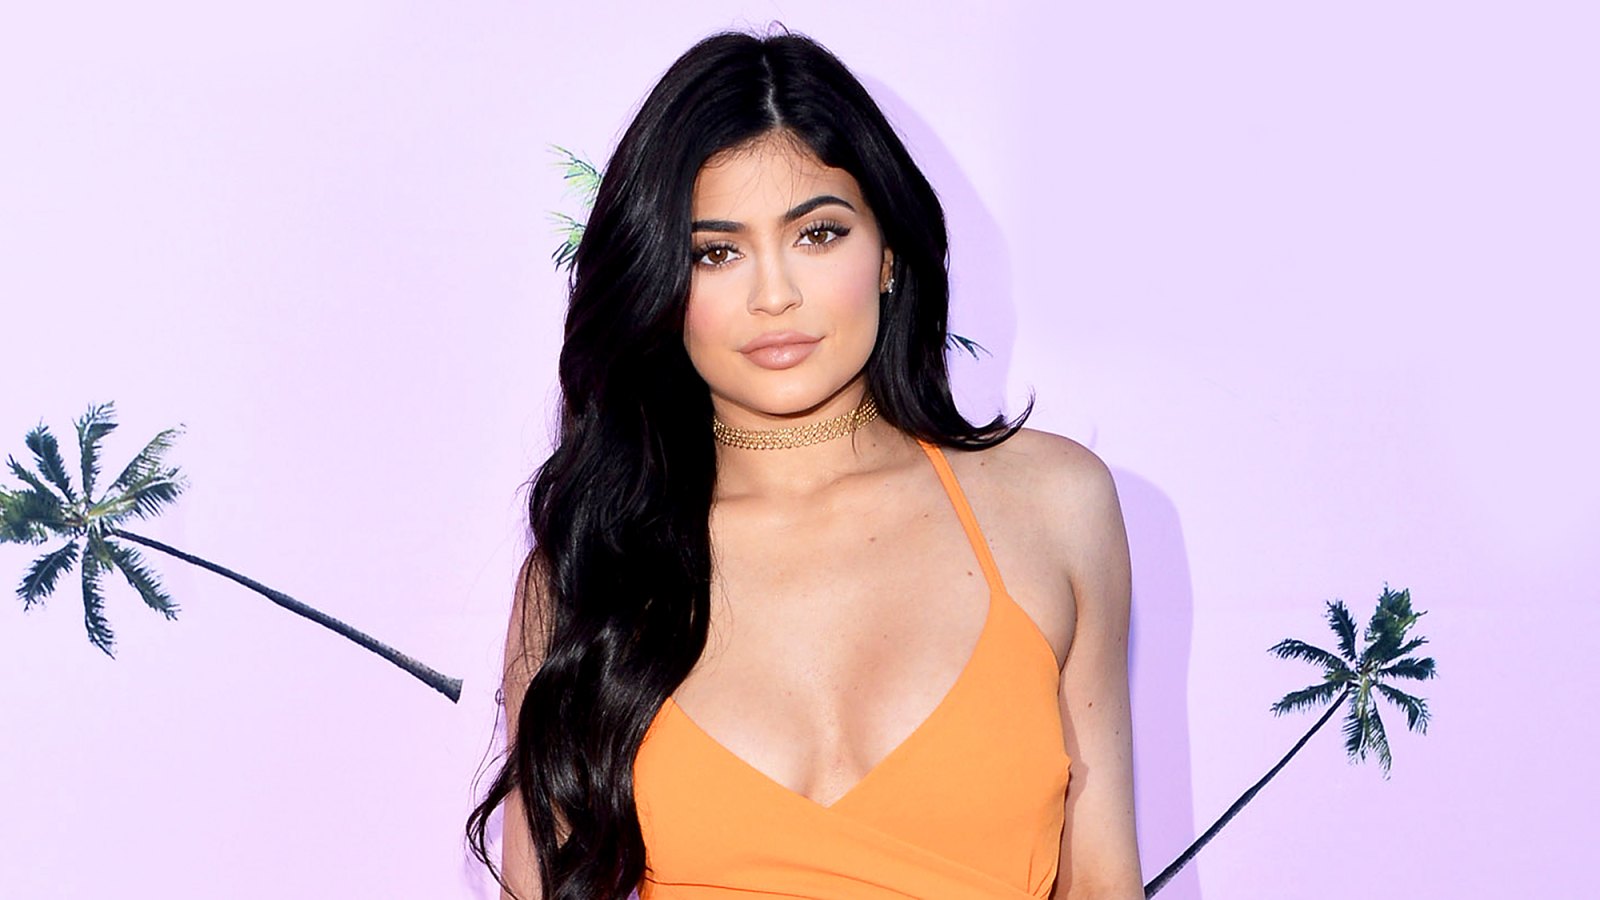 Kylie Jenner attends the PrettyLittleThing.com #PLTxUSA launch party in 2016.